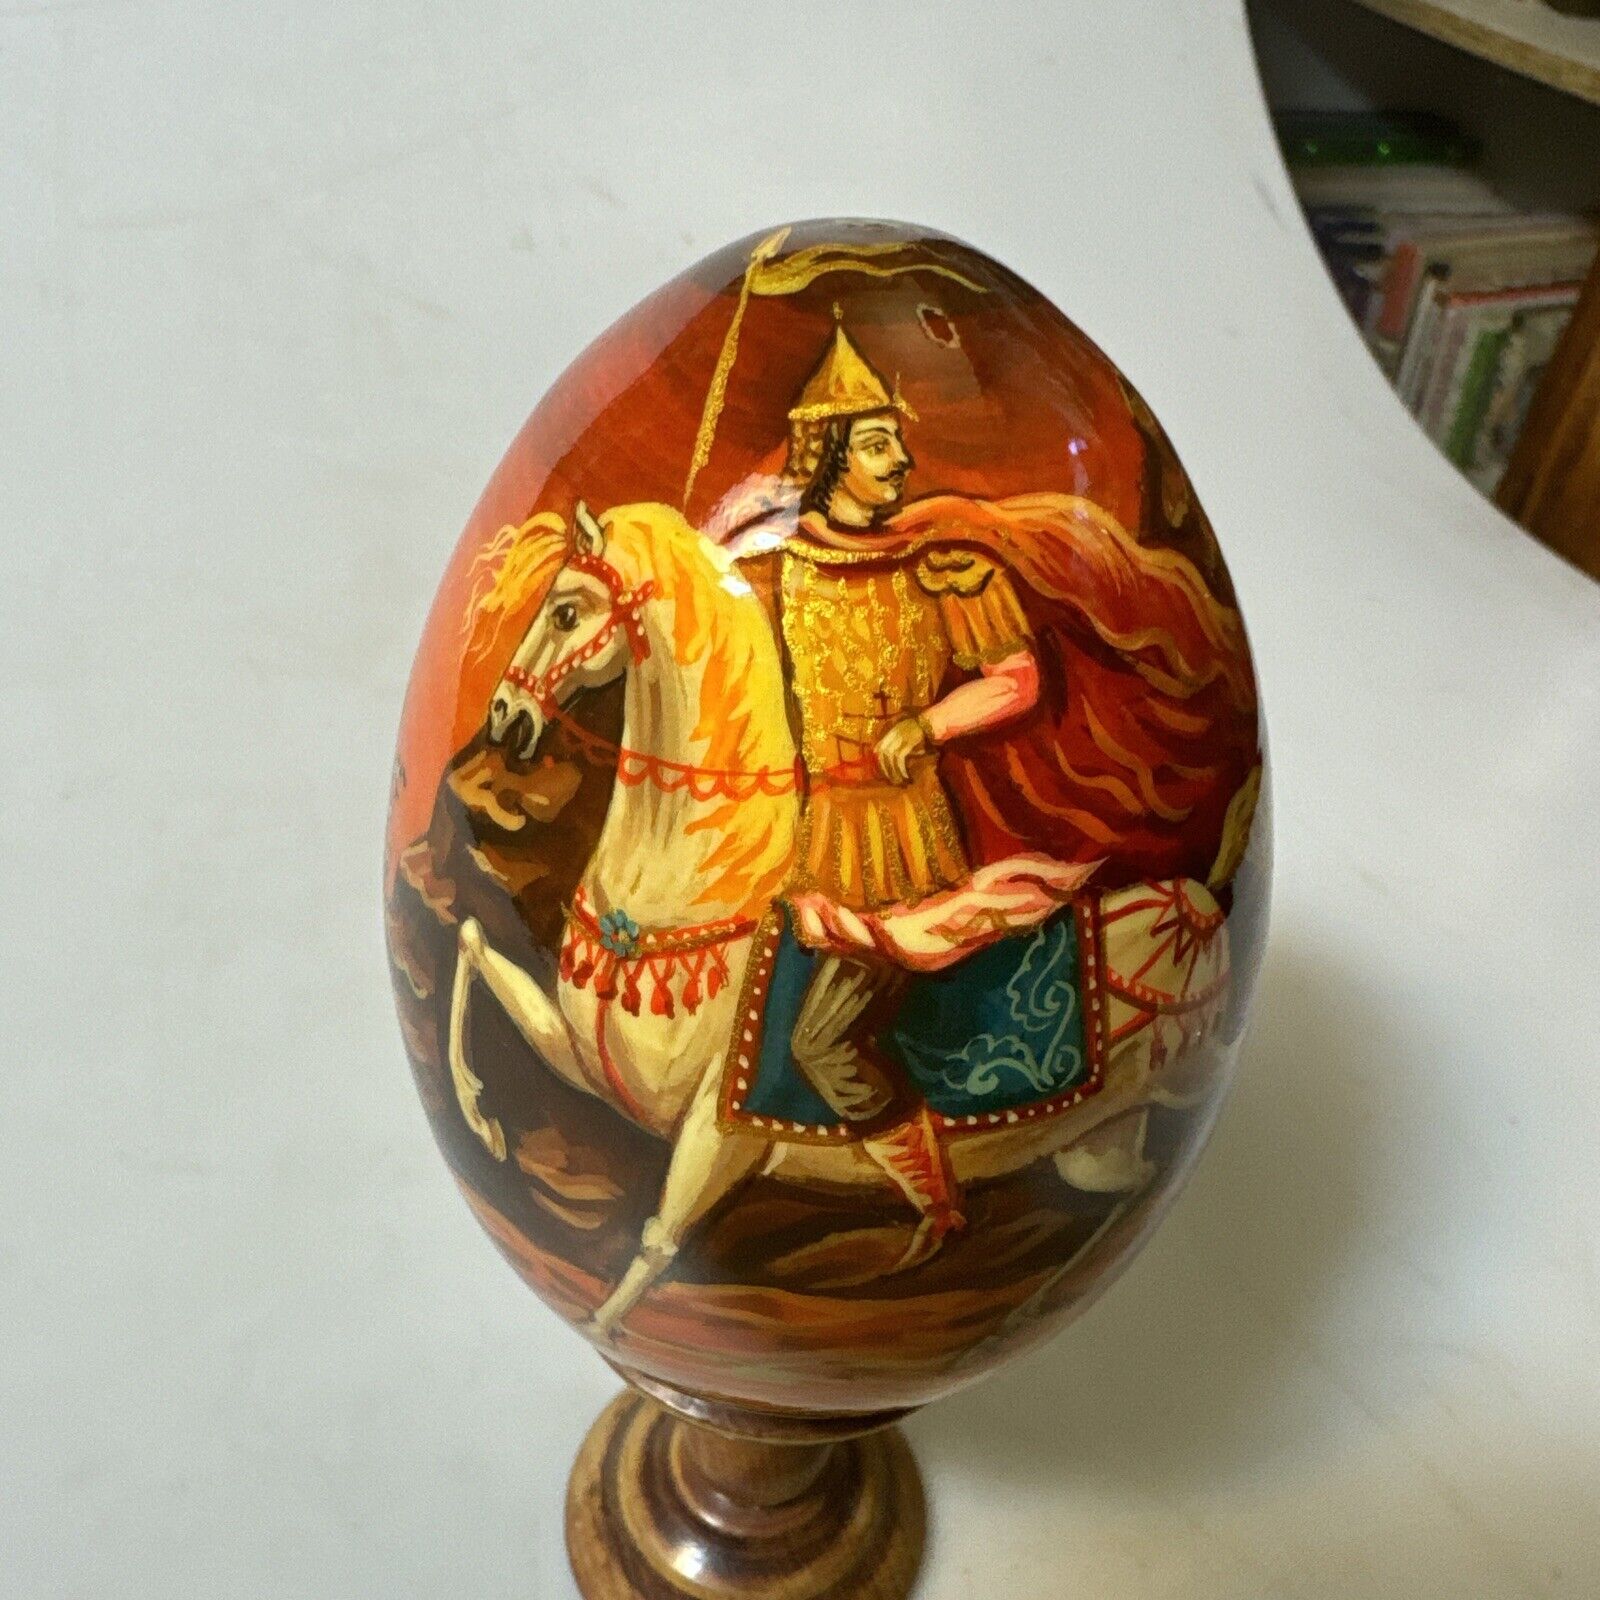 Russian Hand Painted Wooden Egg, Fairytale Motif, Russia  Signed